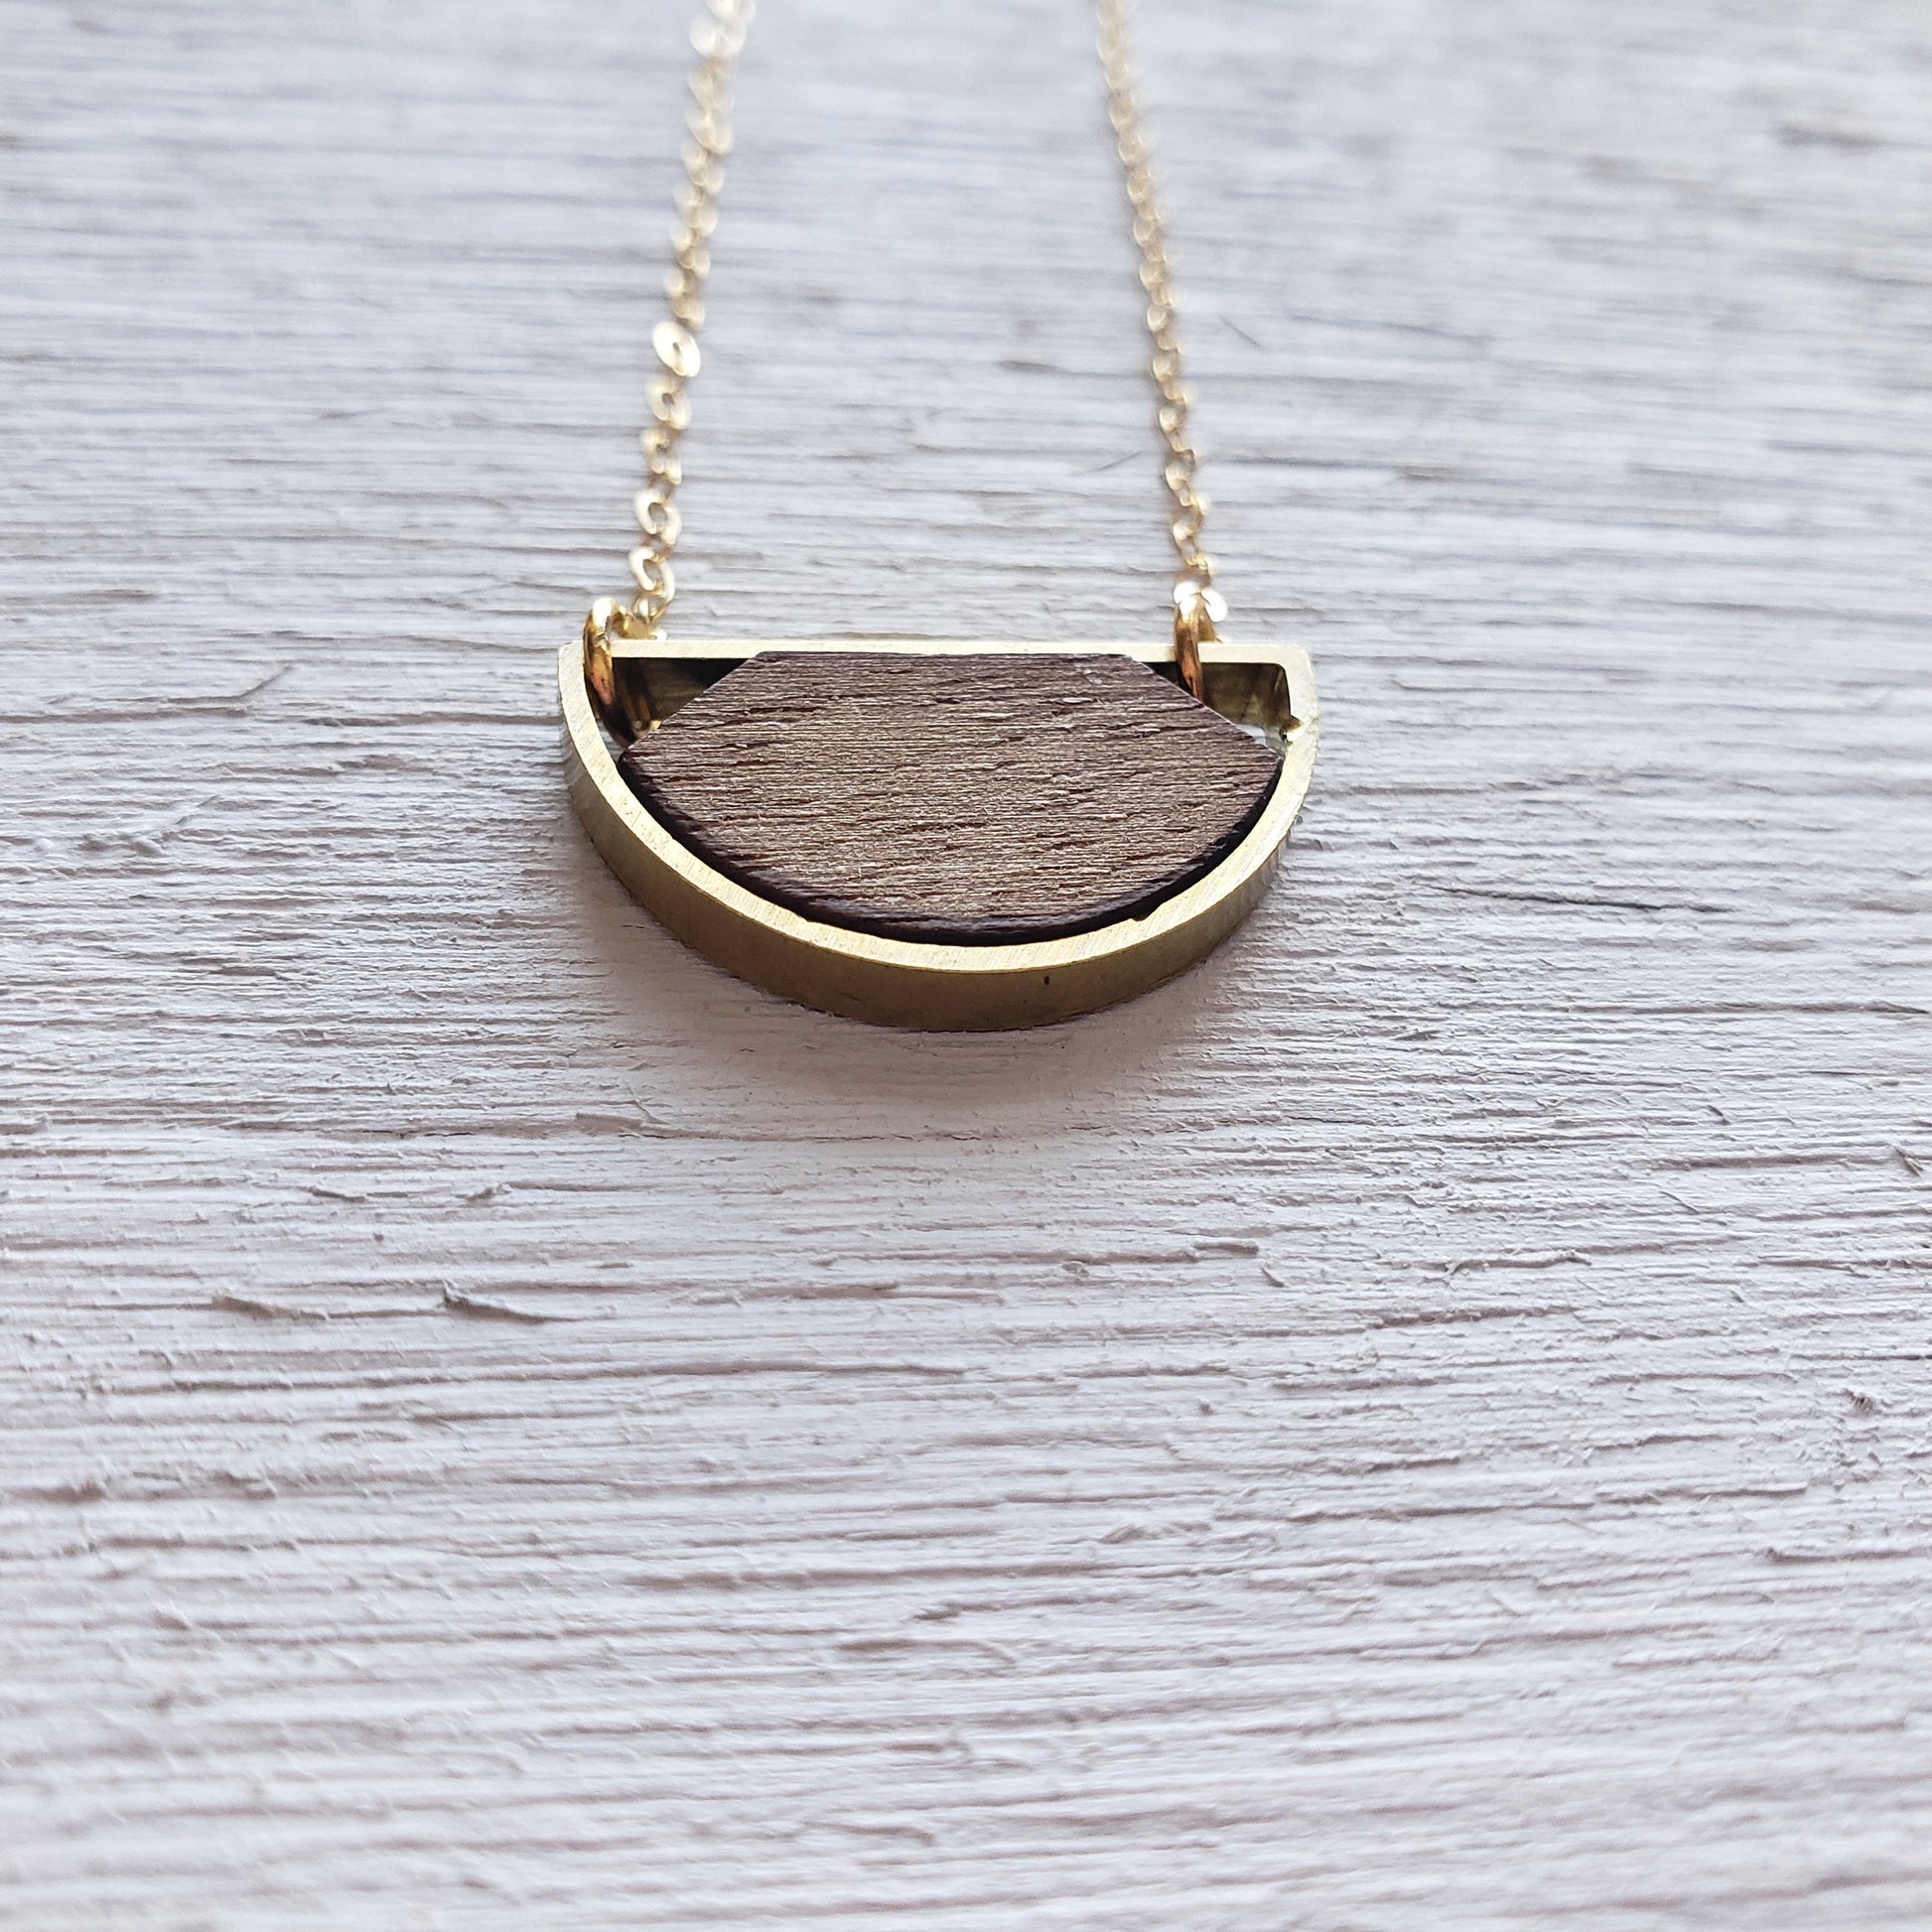 Quarter Moon Necklace- Wooden Laser Cut Jewelry || Gift for women, dainty necklace